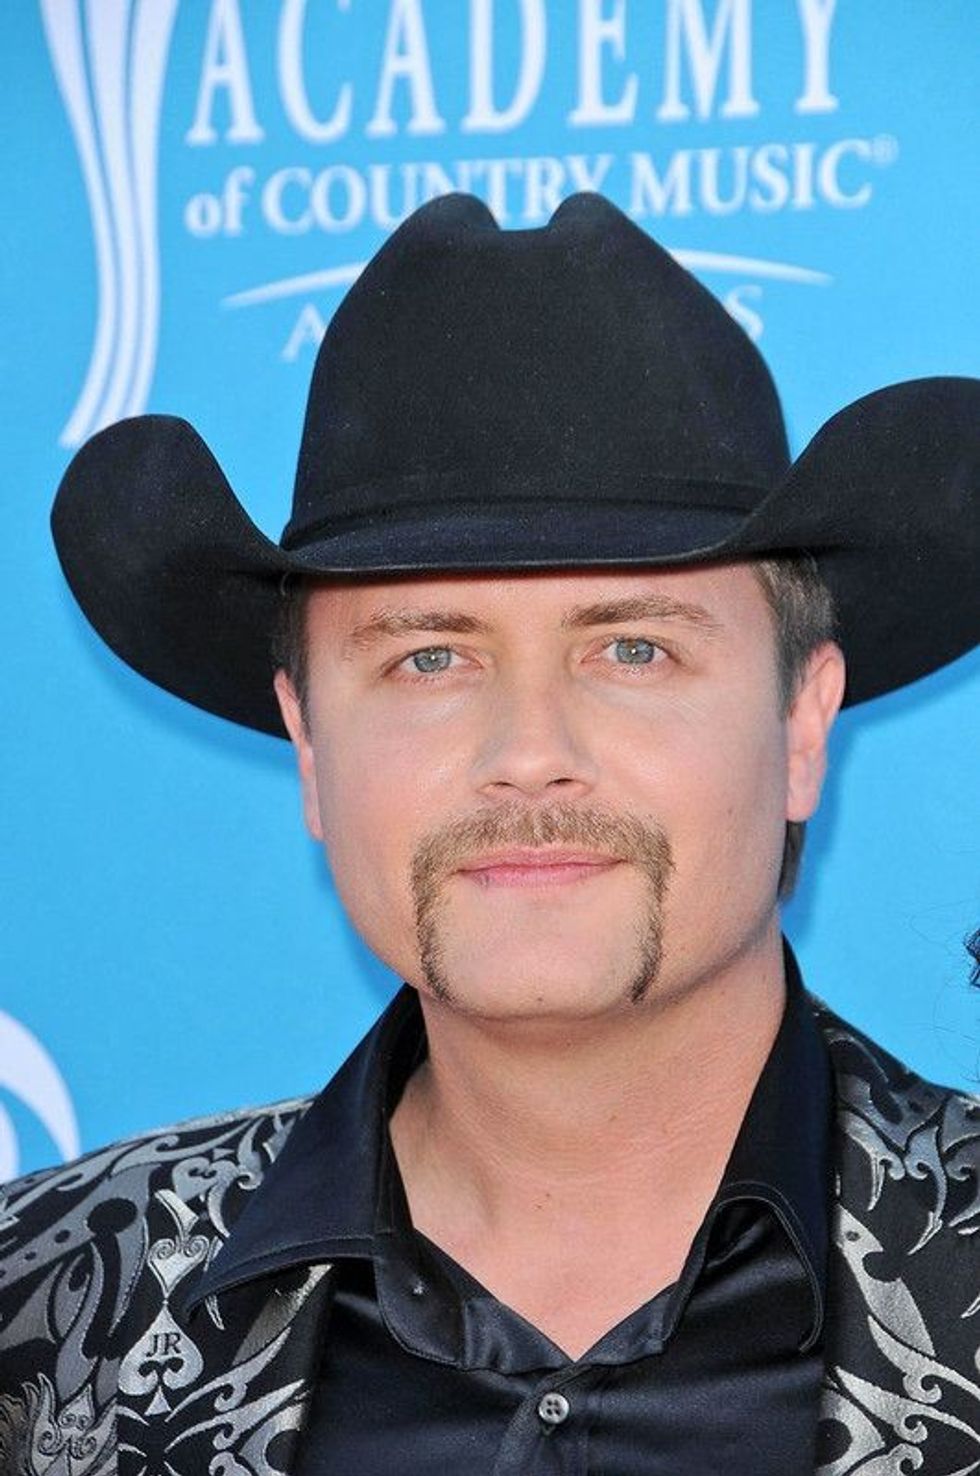 Read all about a very well-known, talented country artist, John Rich!